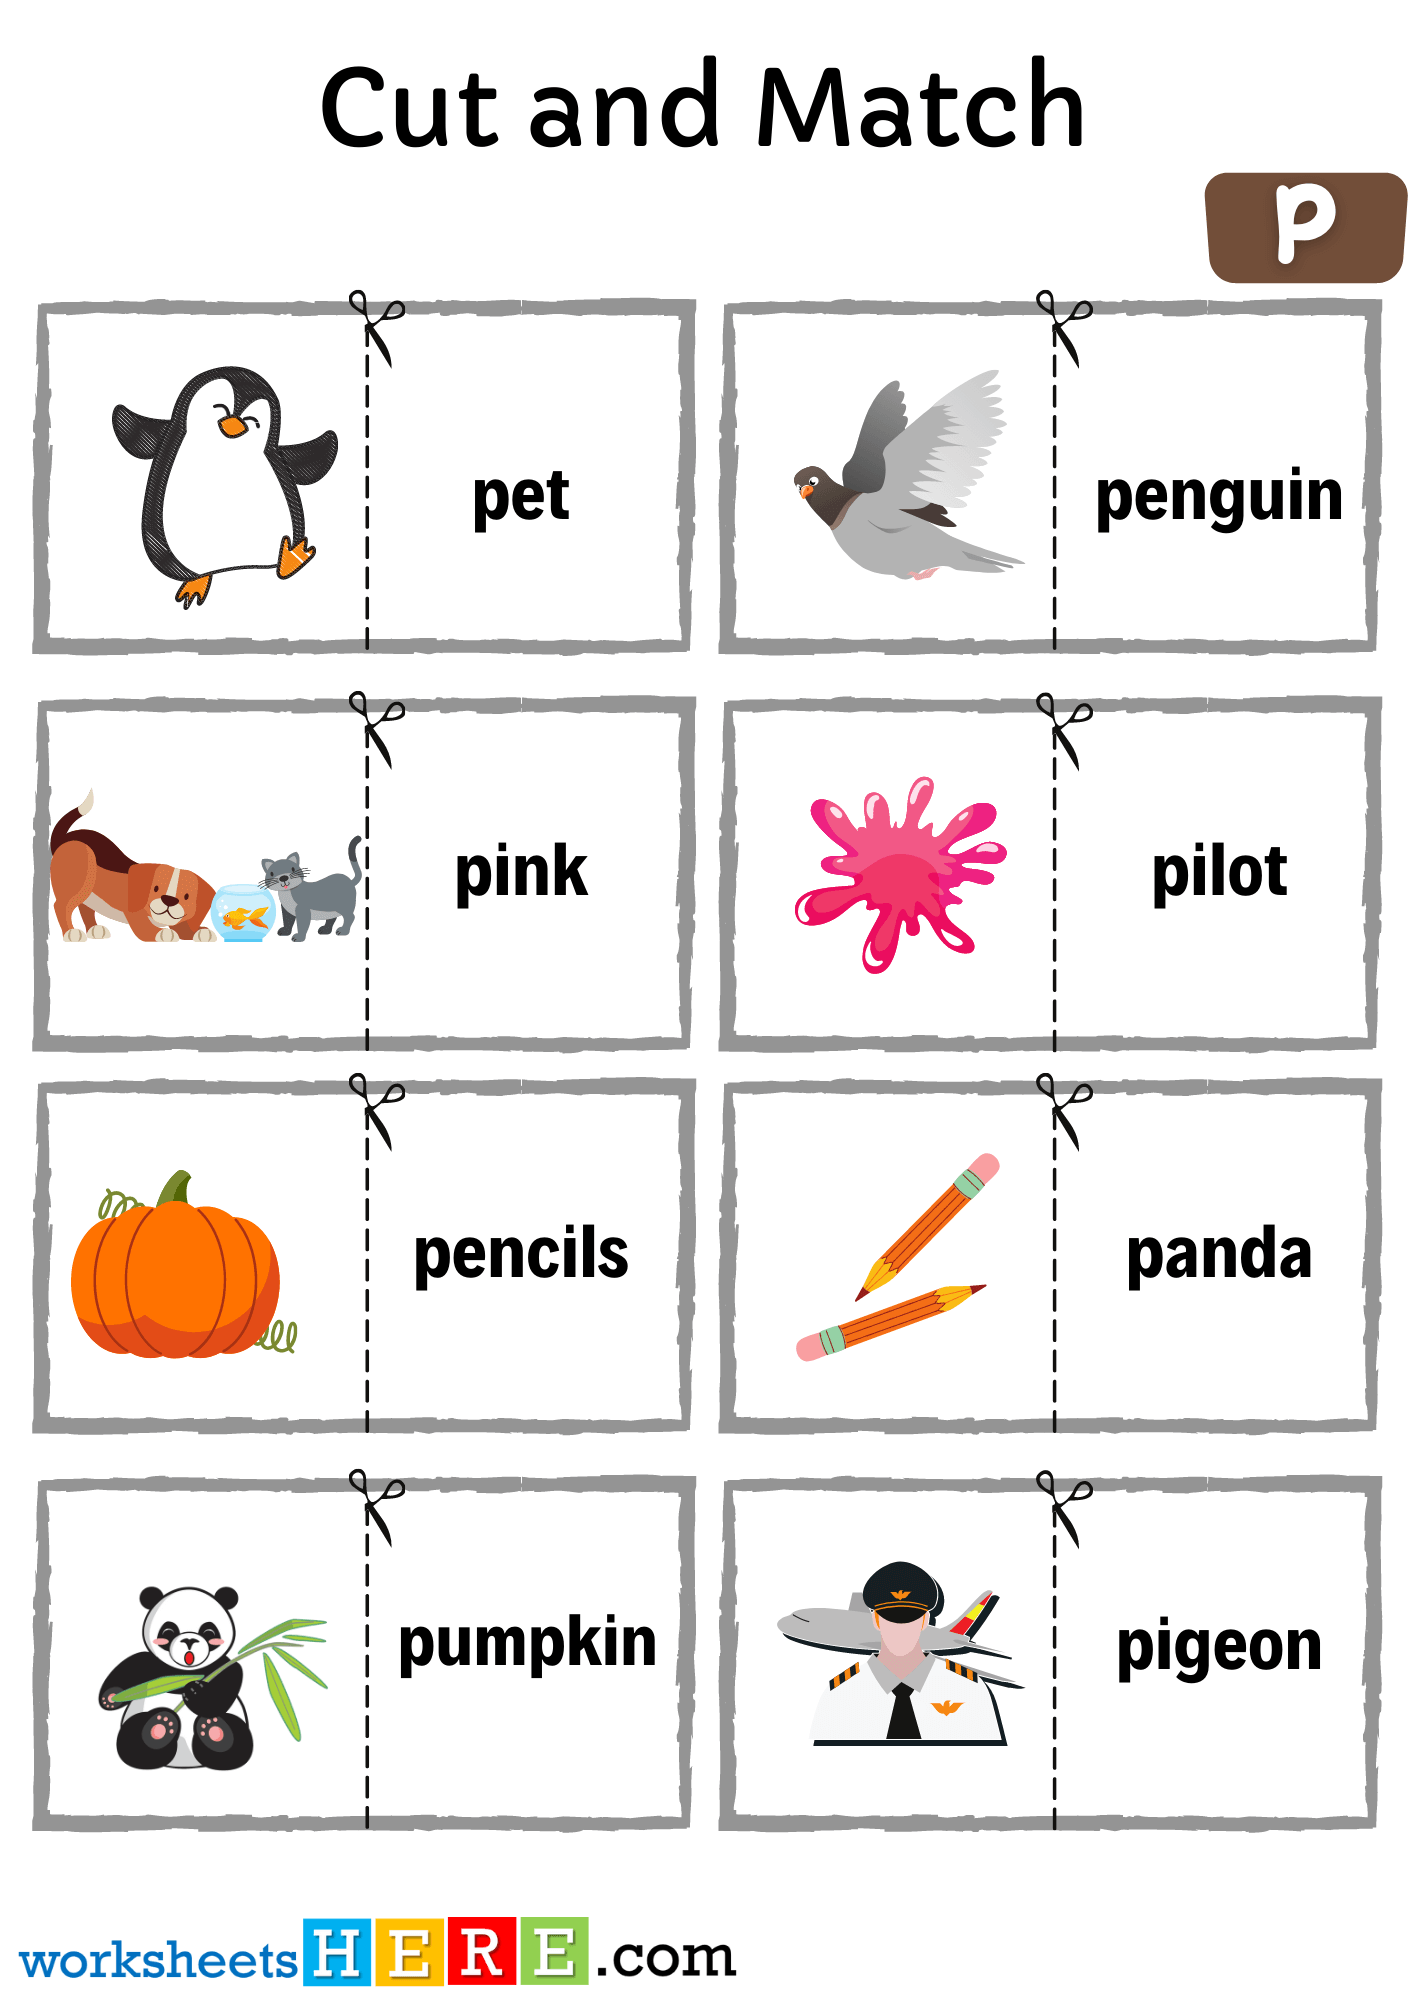 Cut and Match Alphabet Letter P with Pictures Activity Worksheets For Kids